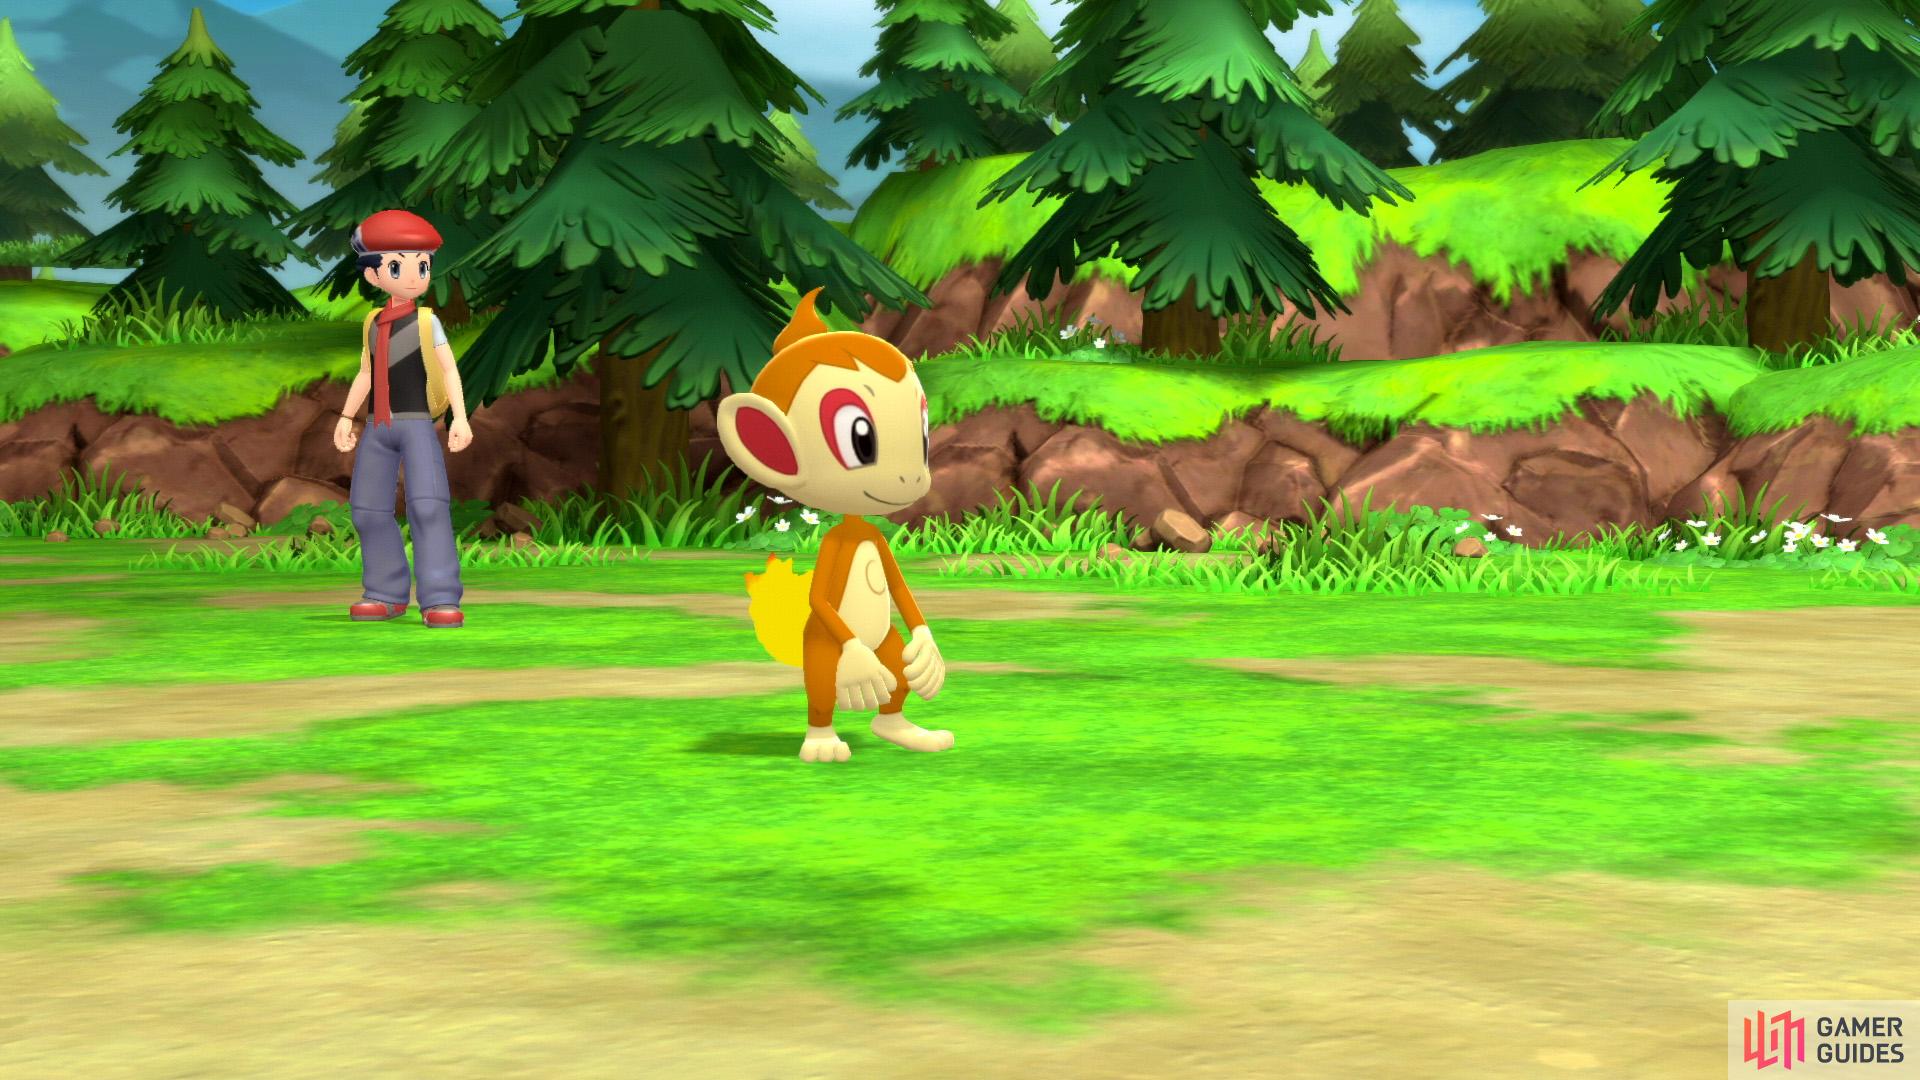 Chimchar is agile and packs a punch.